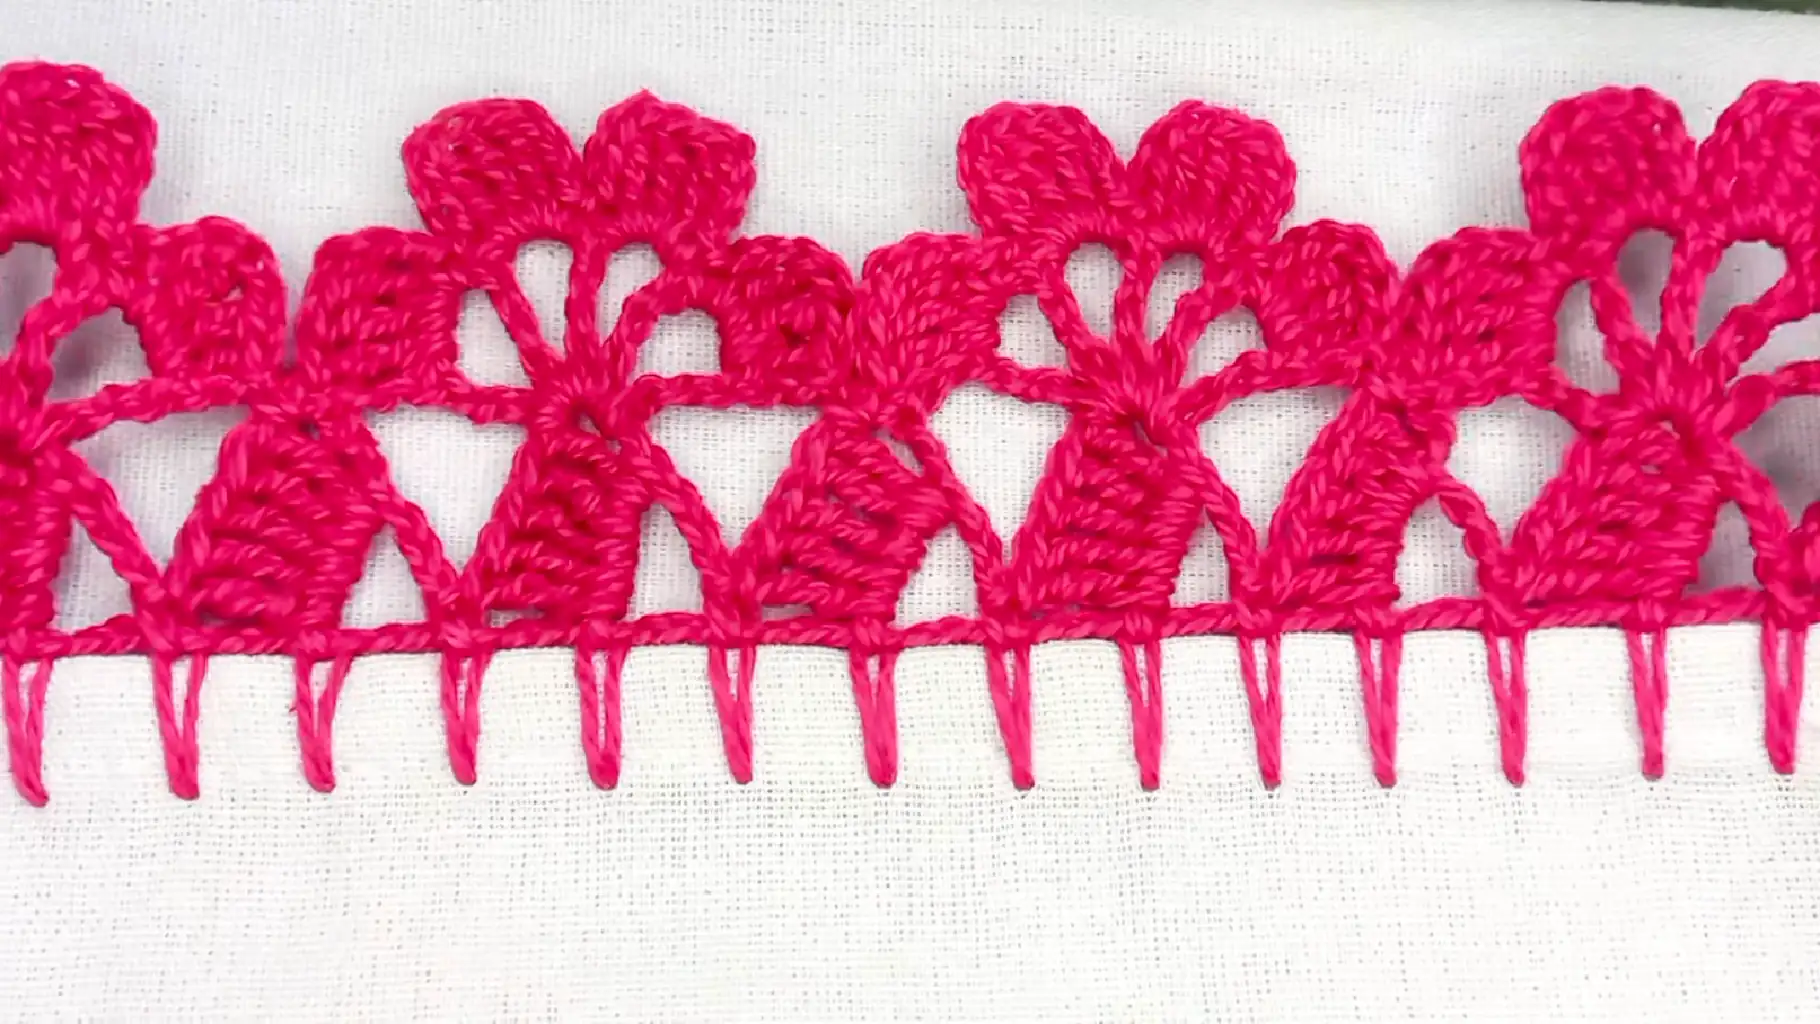 6 Basic Crochet Stitches for Beginners (Learn These First!)